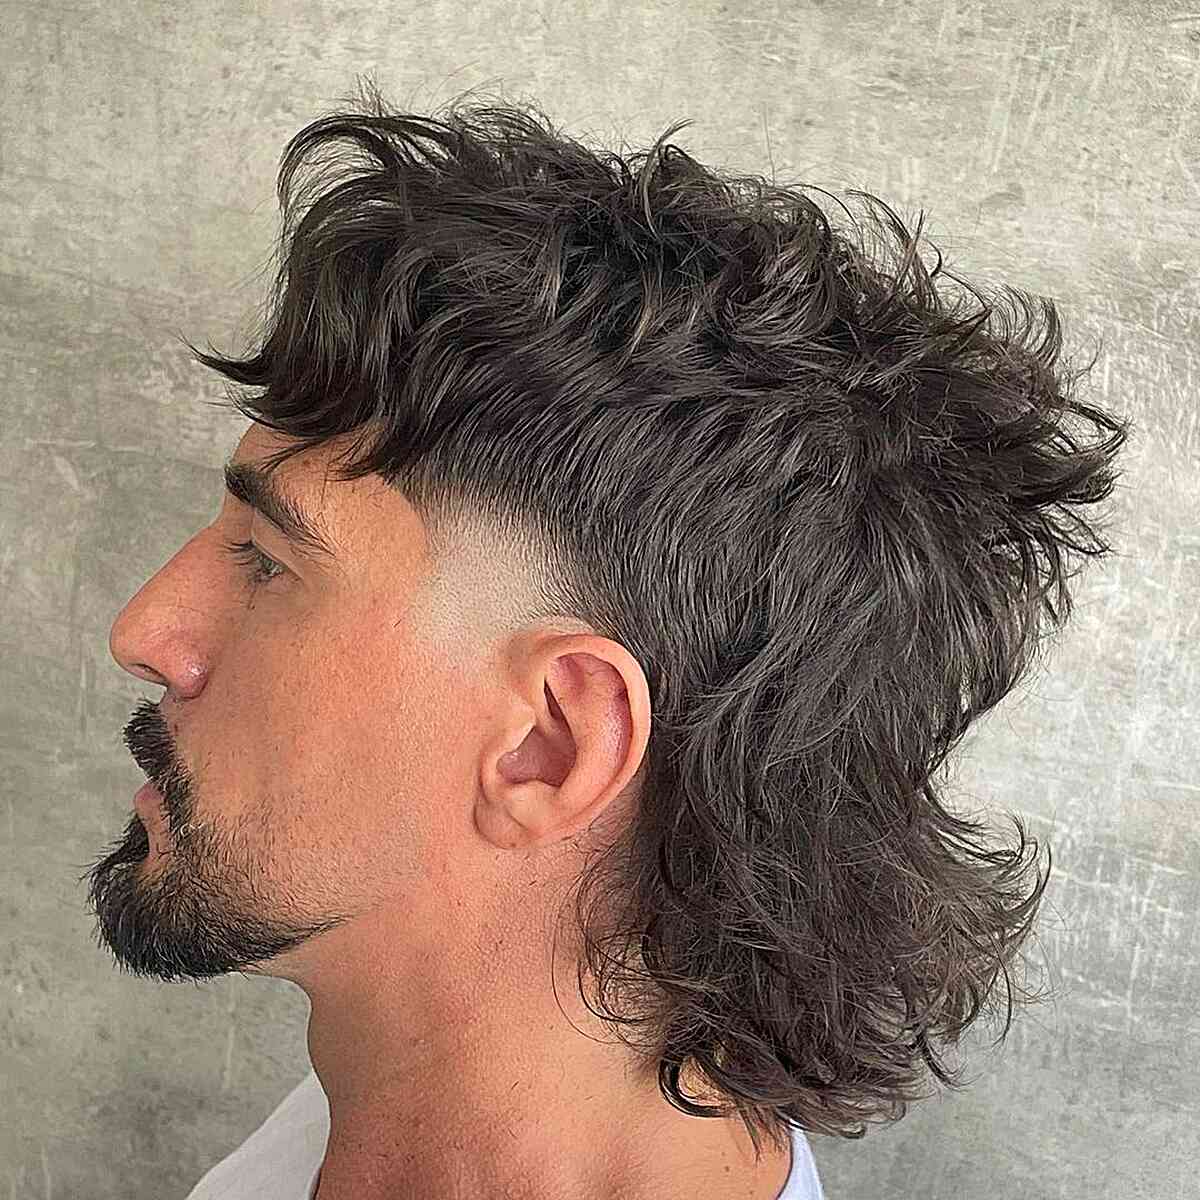 Trending Haircuts For Men 2019 - The Undercut | Mallory Cook